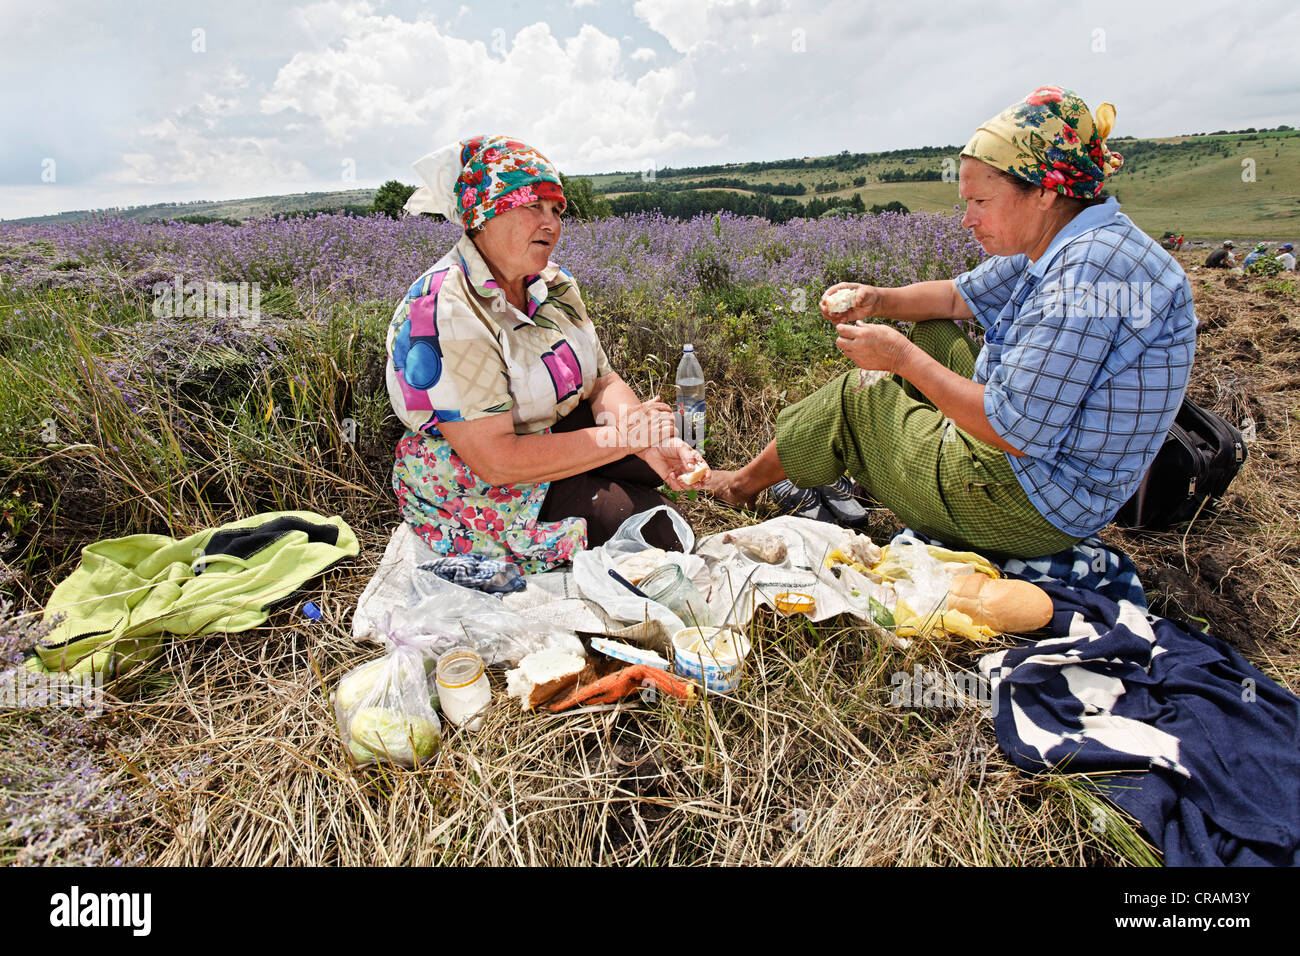 Two women taking a break during the harvest of organically cultivated lavender (Lavandula), Moldova, Southeastern Europe Stock Photo